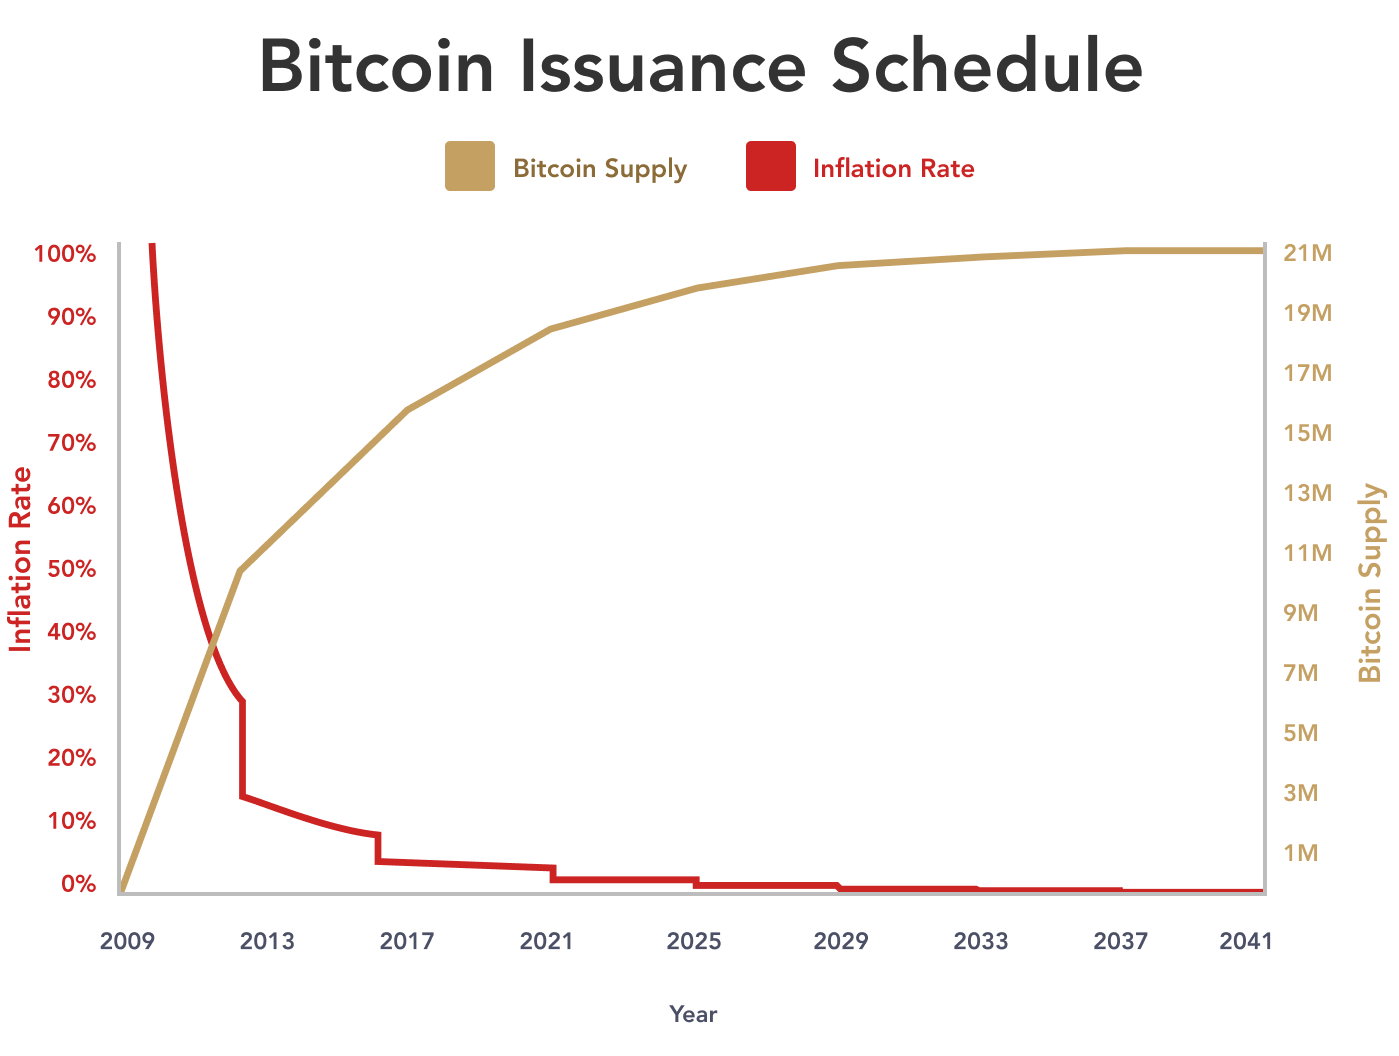 A depiction of Bitcoin&rsquo;s Issuance Schedule and Inflation Rate.